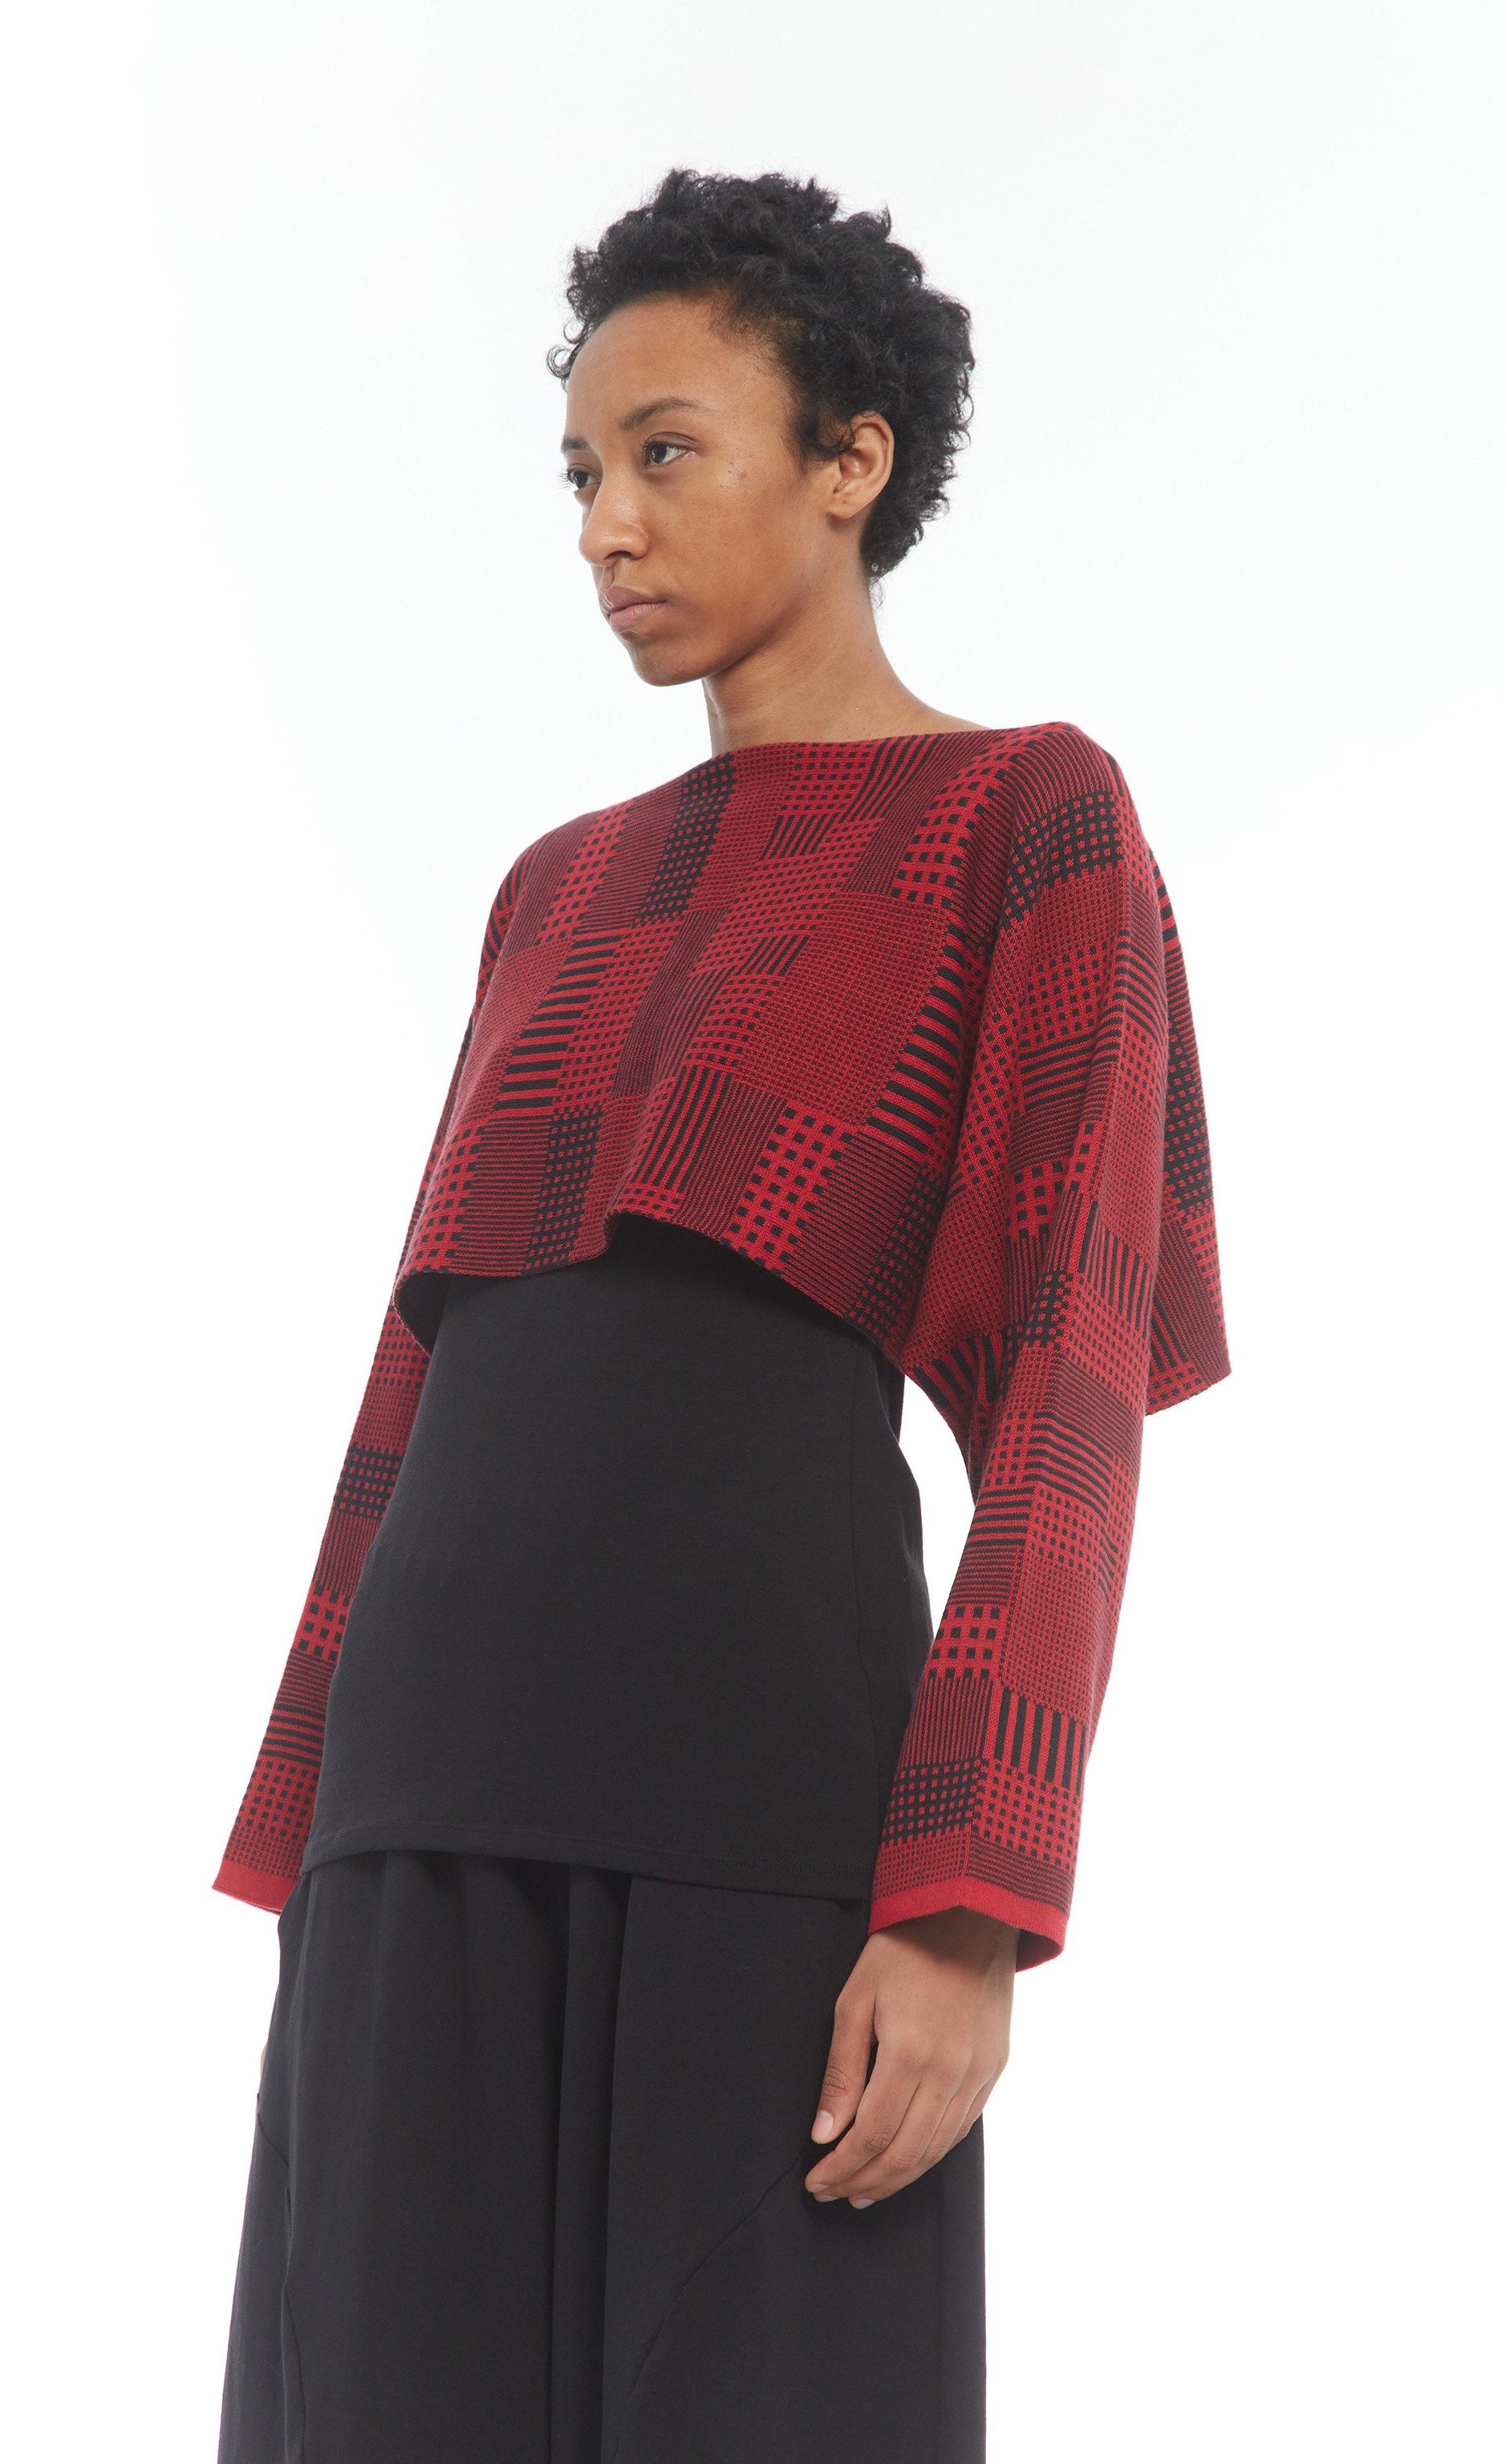 Front top half view of a woman wearing the mxmatthildur vonji sweater. This sweater is red and black plaid patchwork. The sweater has long sleeves and is being work as a cropped top.